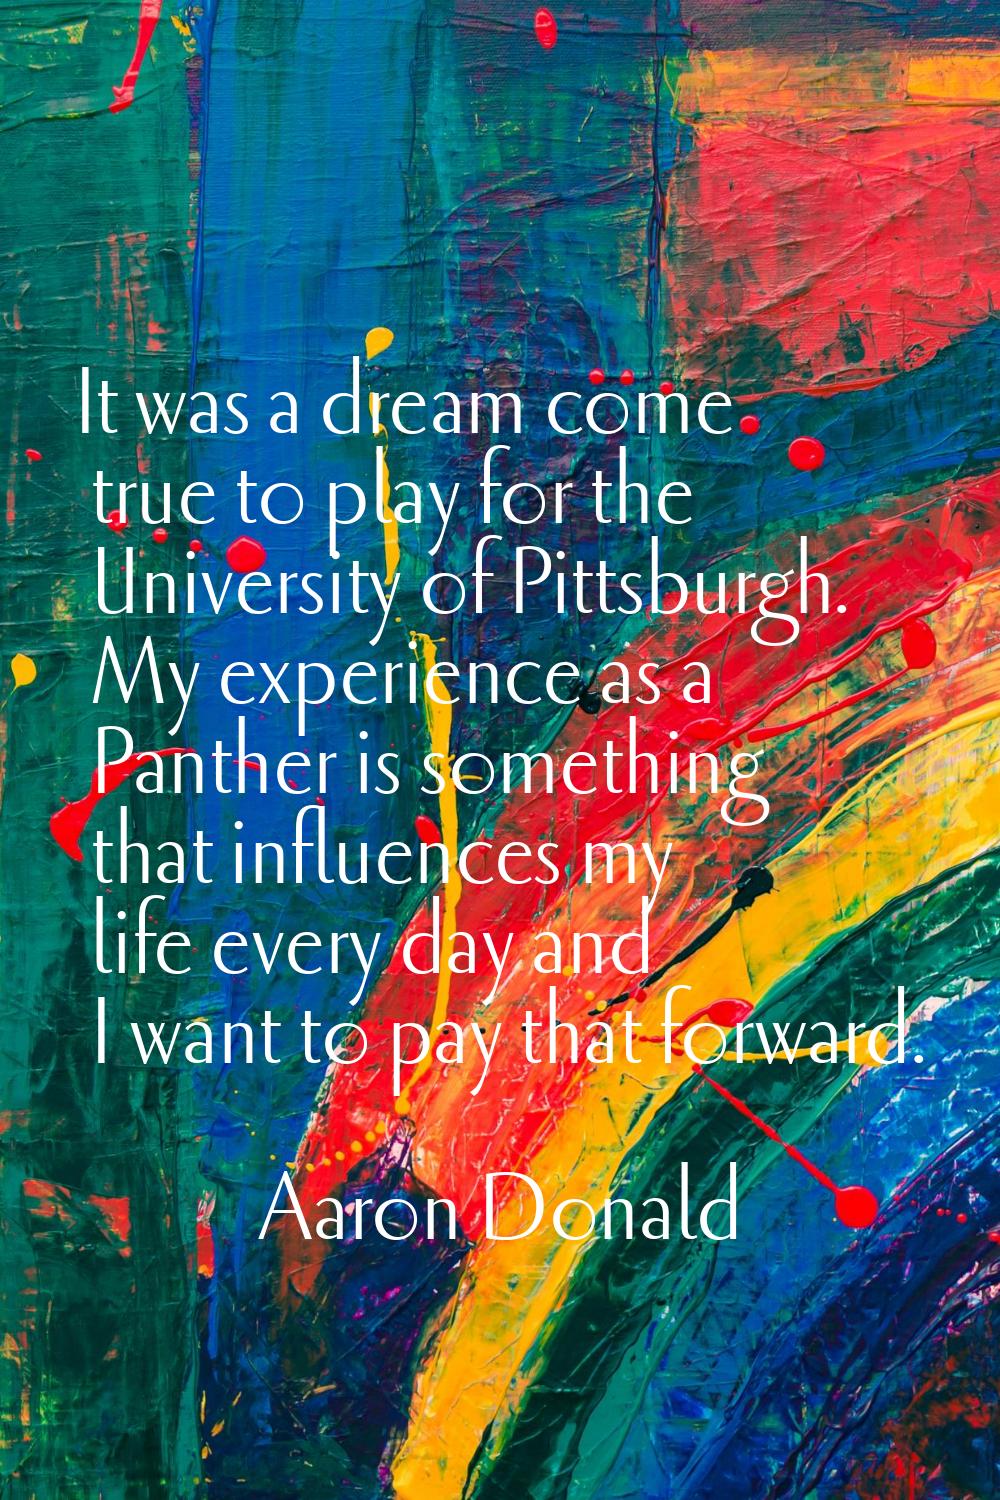 It was a dream come true to play for the University of Pittsburgh. My experience as a Panther is so